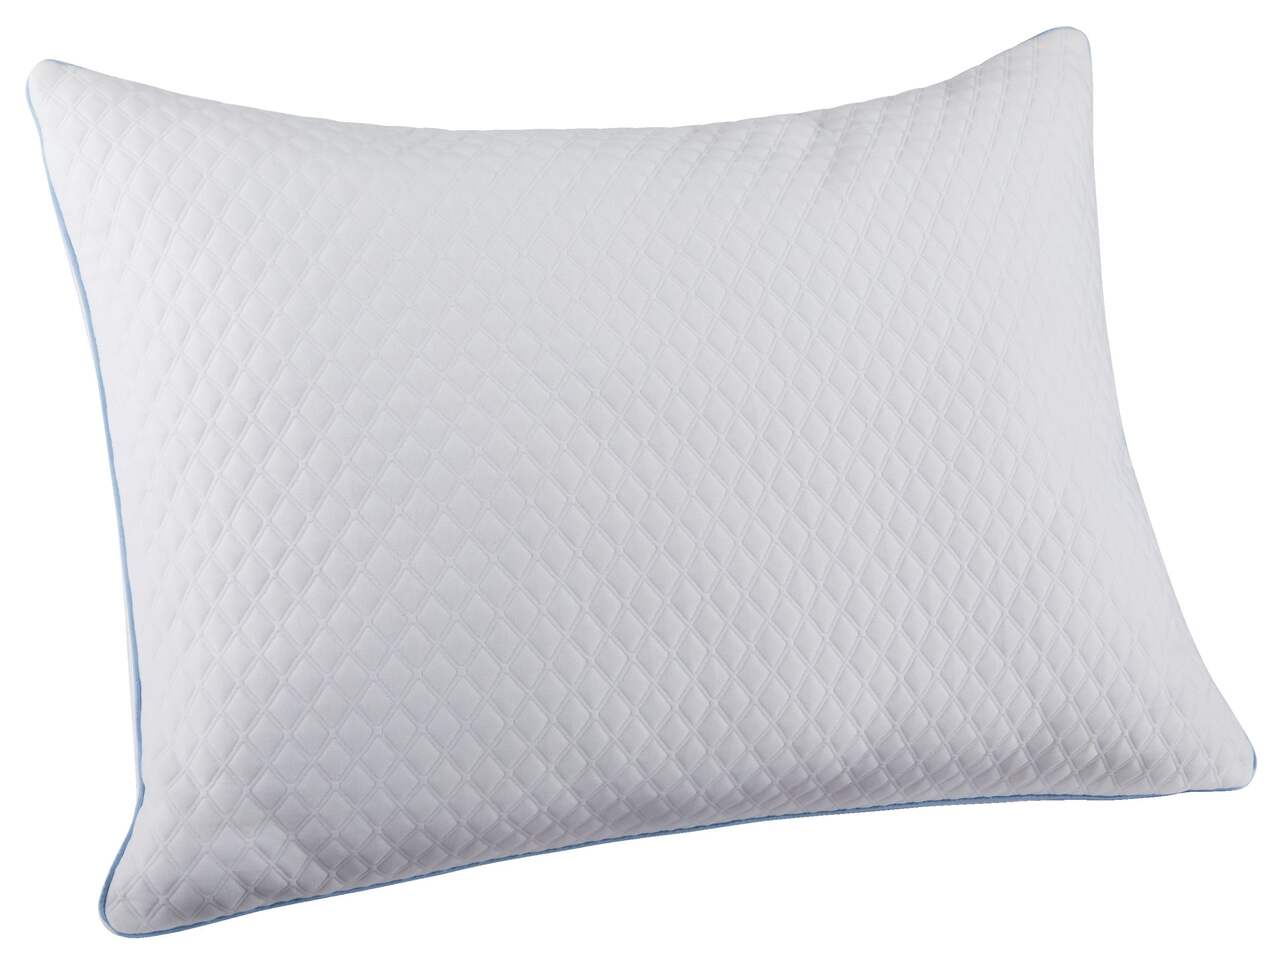 https://media-www.canadiantire.ca/product/living/home-decor/bed-bath-decor/0461562/polyester-filling-pillow-120-gsm-57edc829-76f1-4878-9d4a-c19cf3afcae5-jpgrendition.jpg?imdensity=1&imwidth=640&impolicy=mZoom